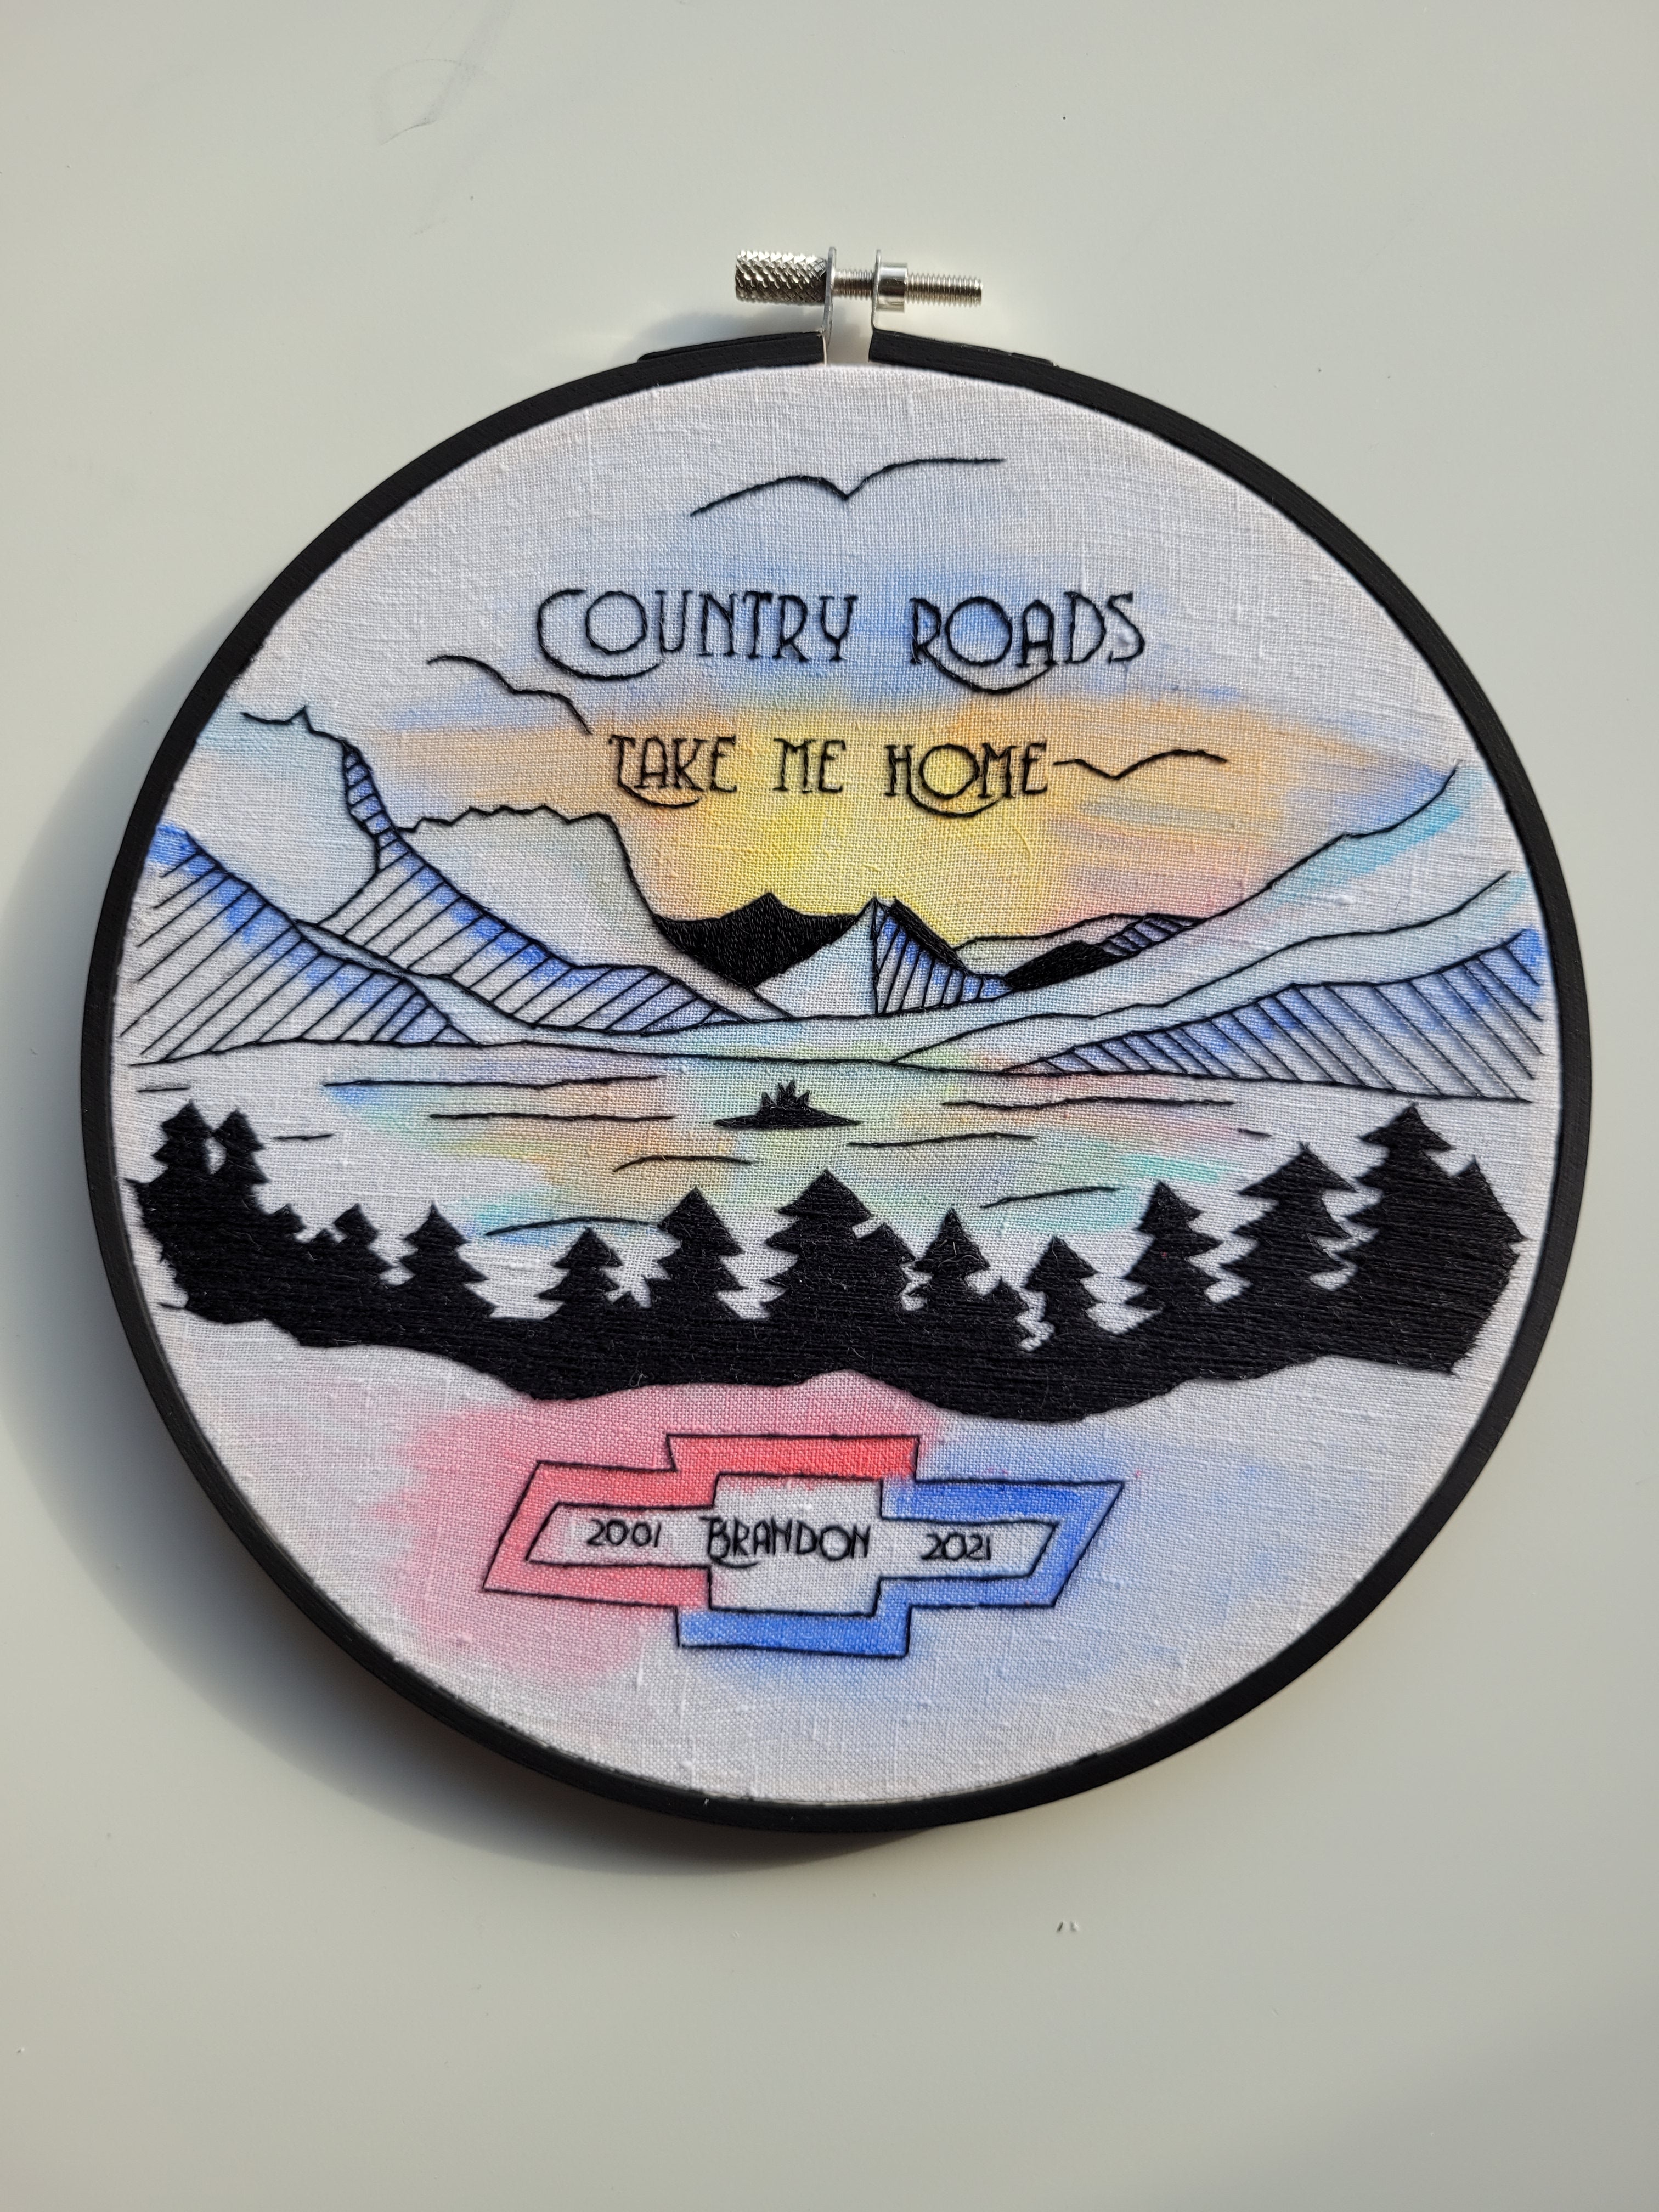 embroidery hoop of mountains and valley. text: 'Country Roads Take me Home 2001 Brandon 2021"